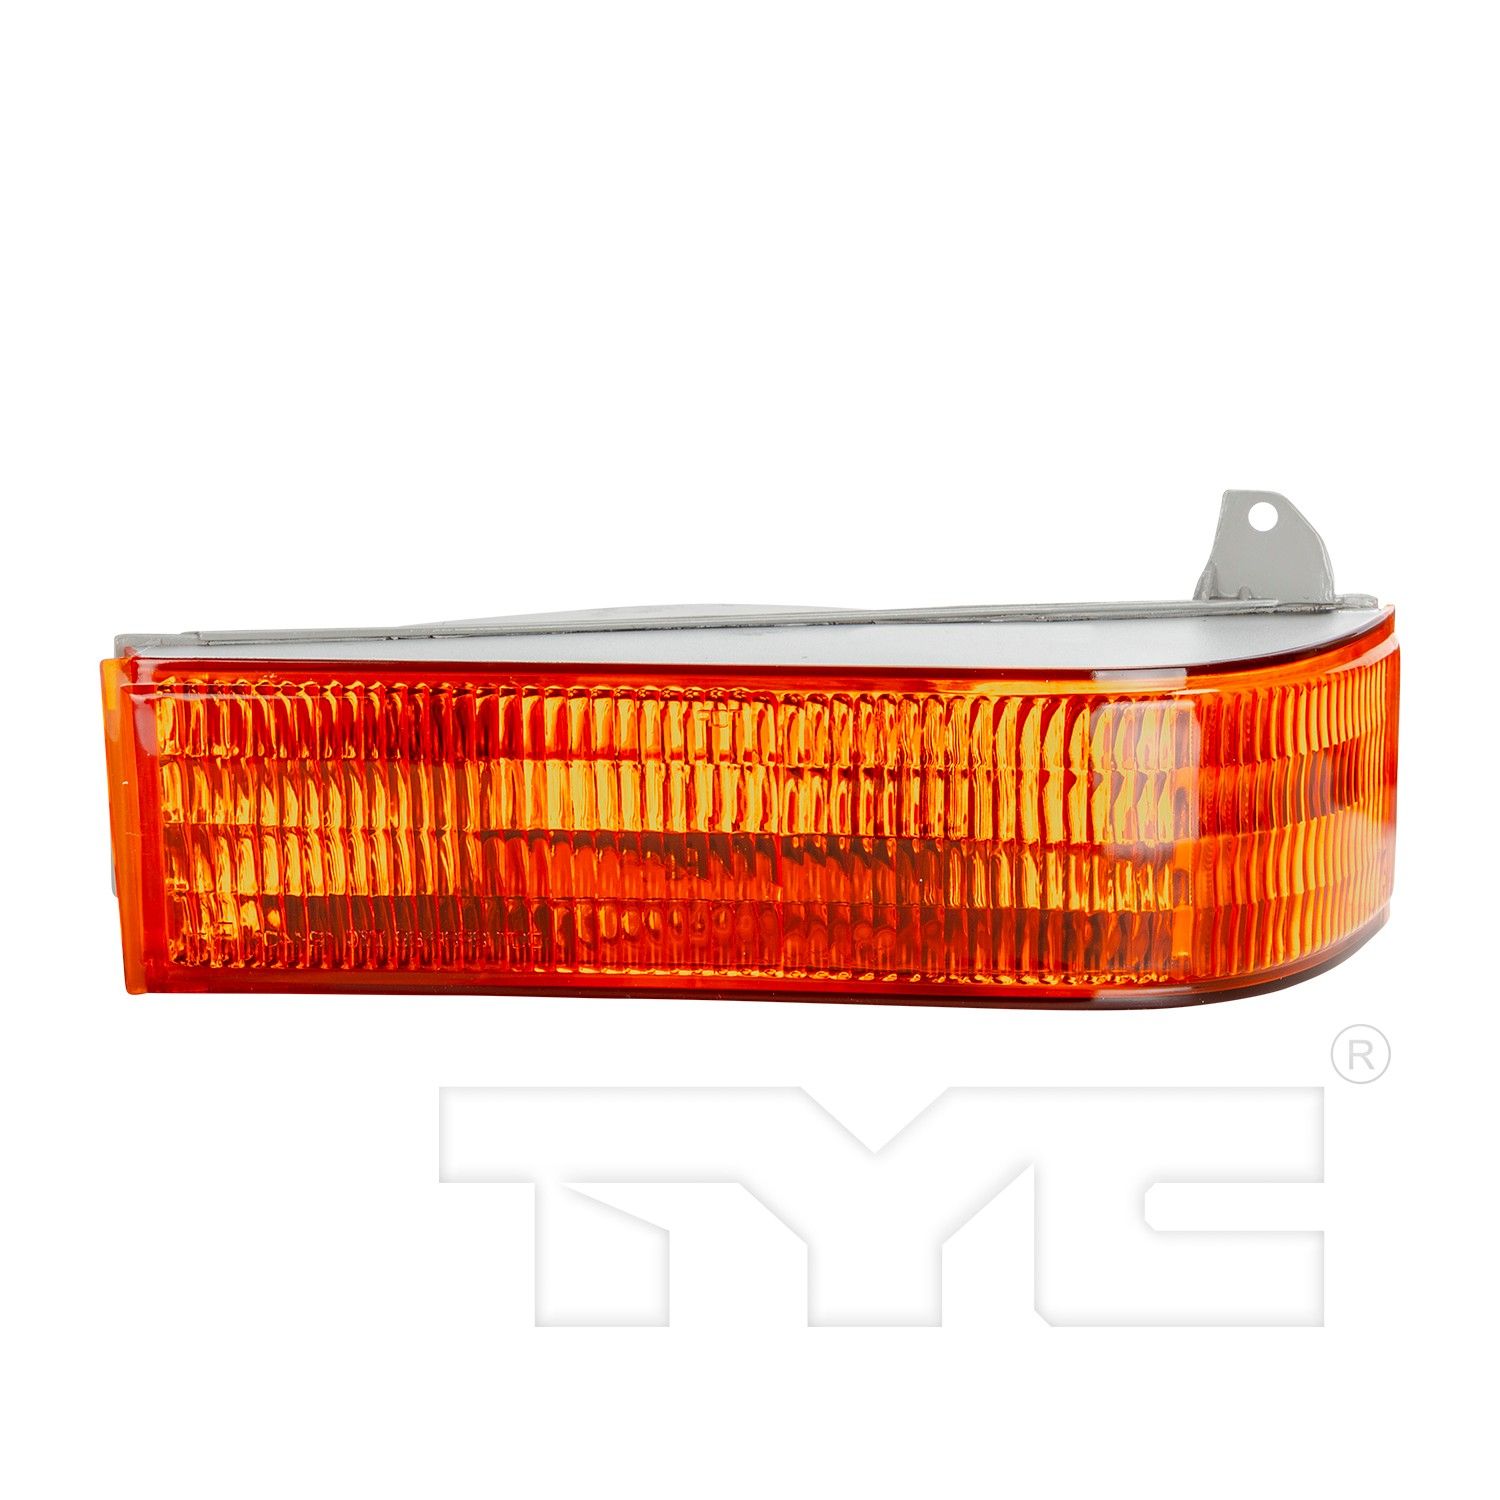 TYC 12-1402-01 Parking Light for Ford Bronco Fits 1991 Ford Ranger - image 4 of 4